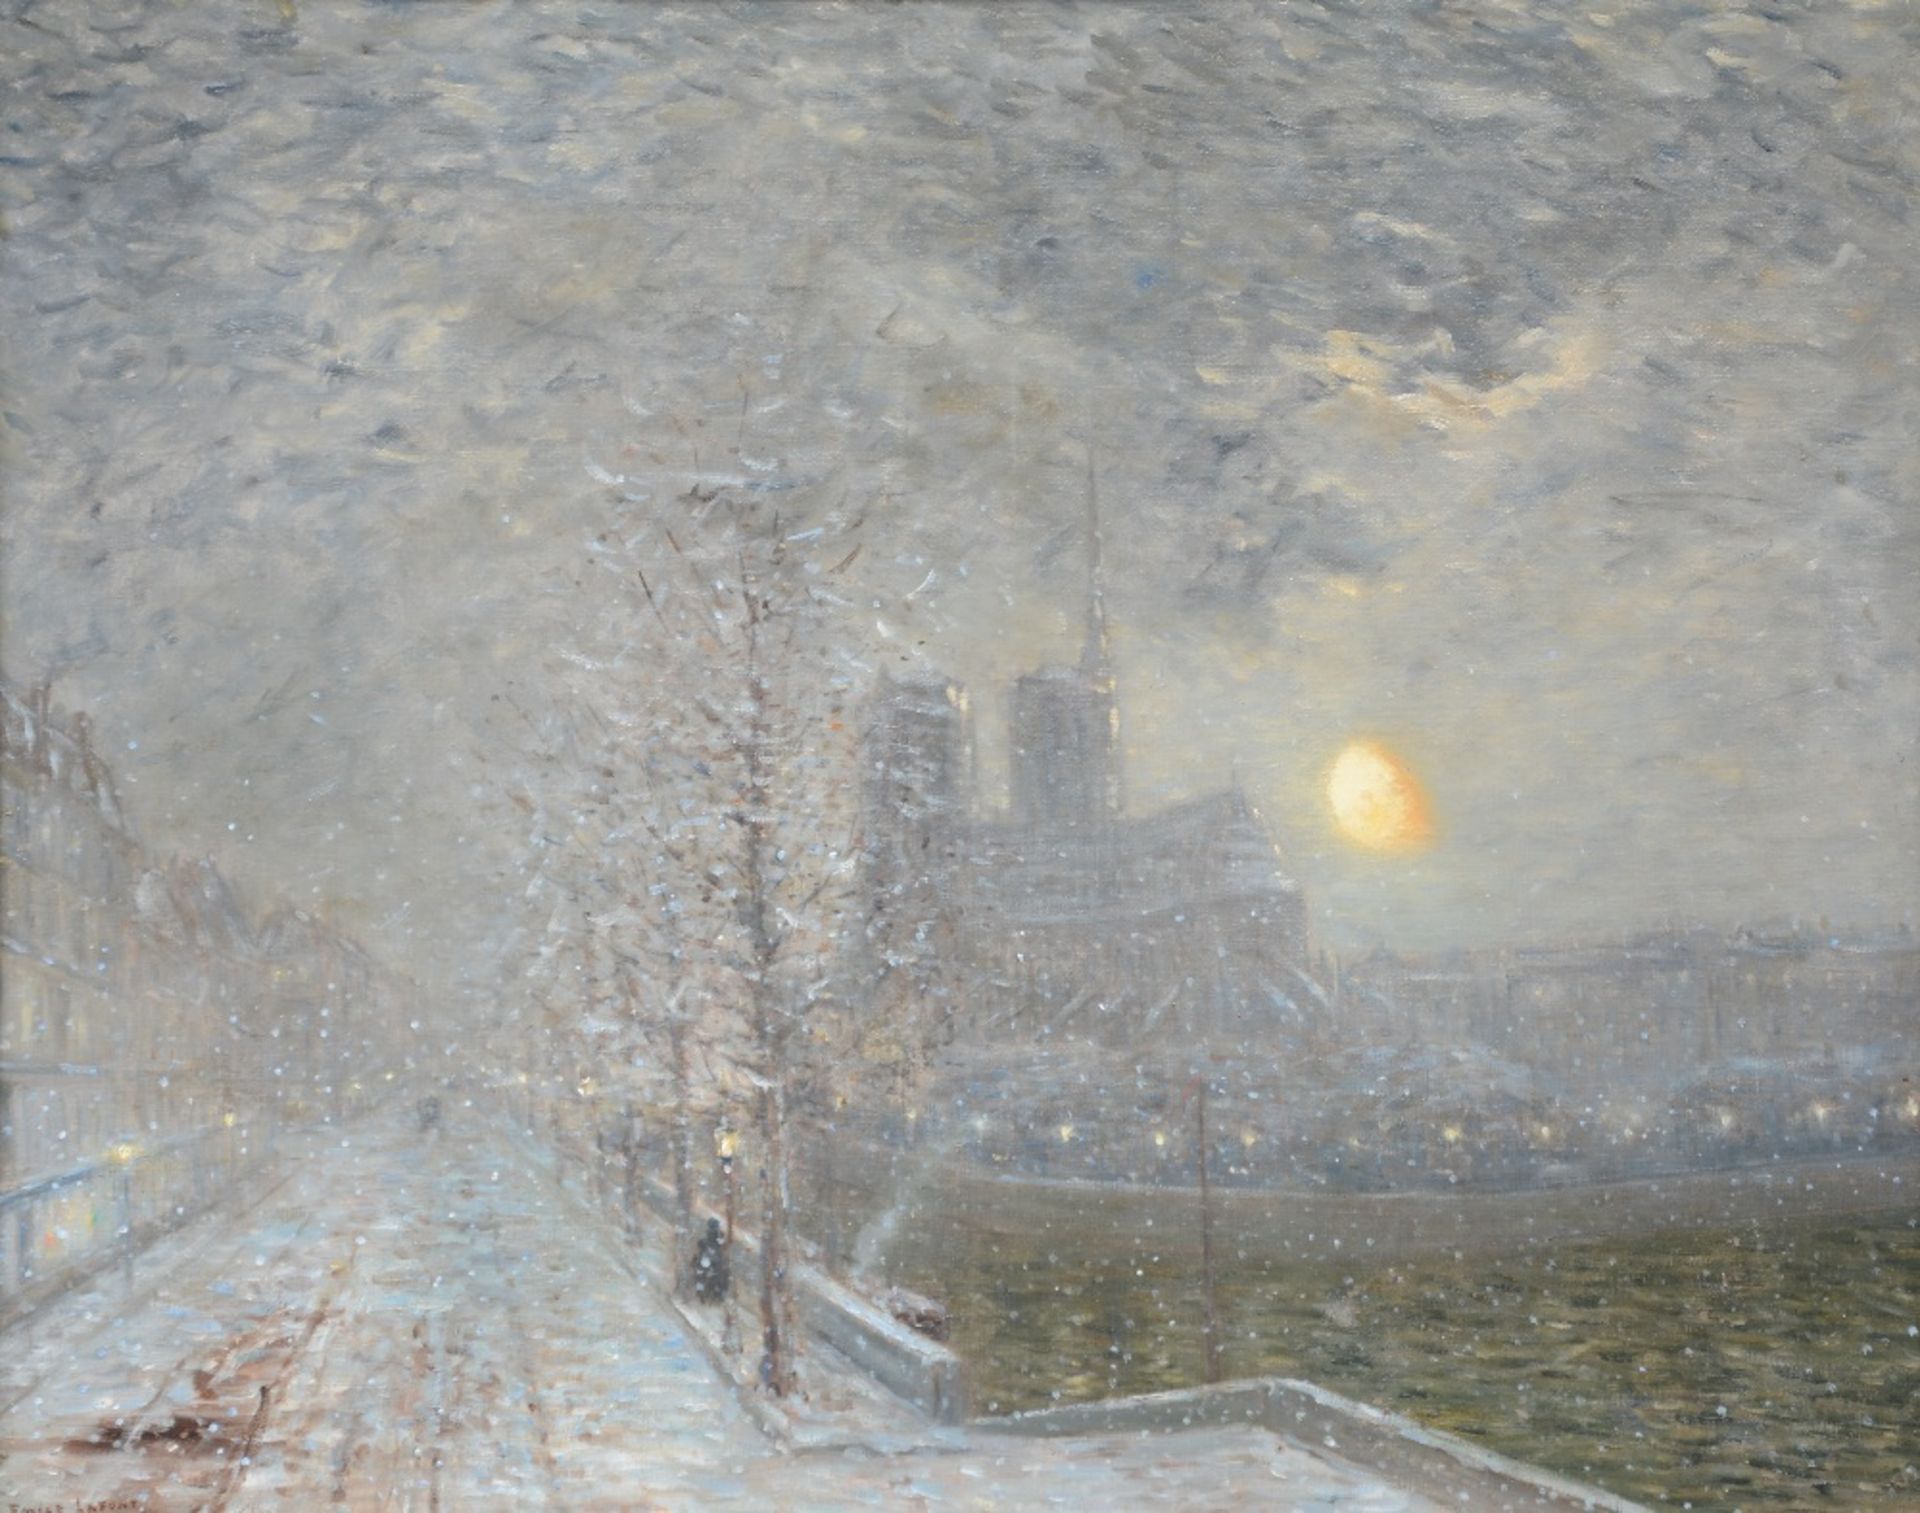 Lafont E.R., the cathedral of Notre Dame in Paris on a winter night, oil on canvas, 65,5 x 81,5 cm